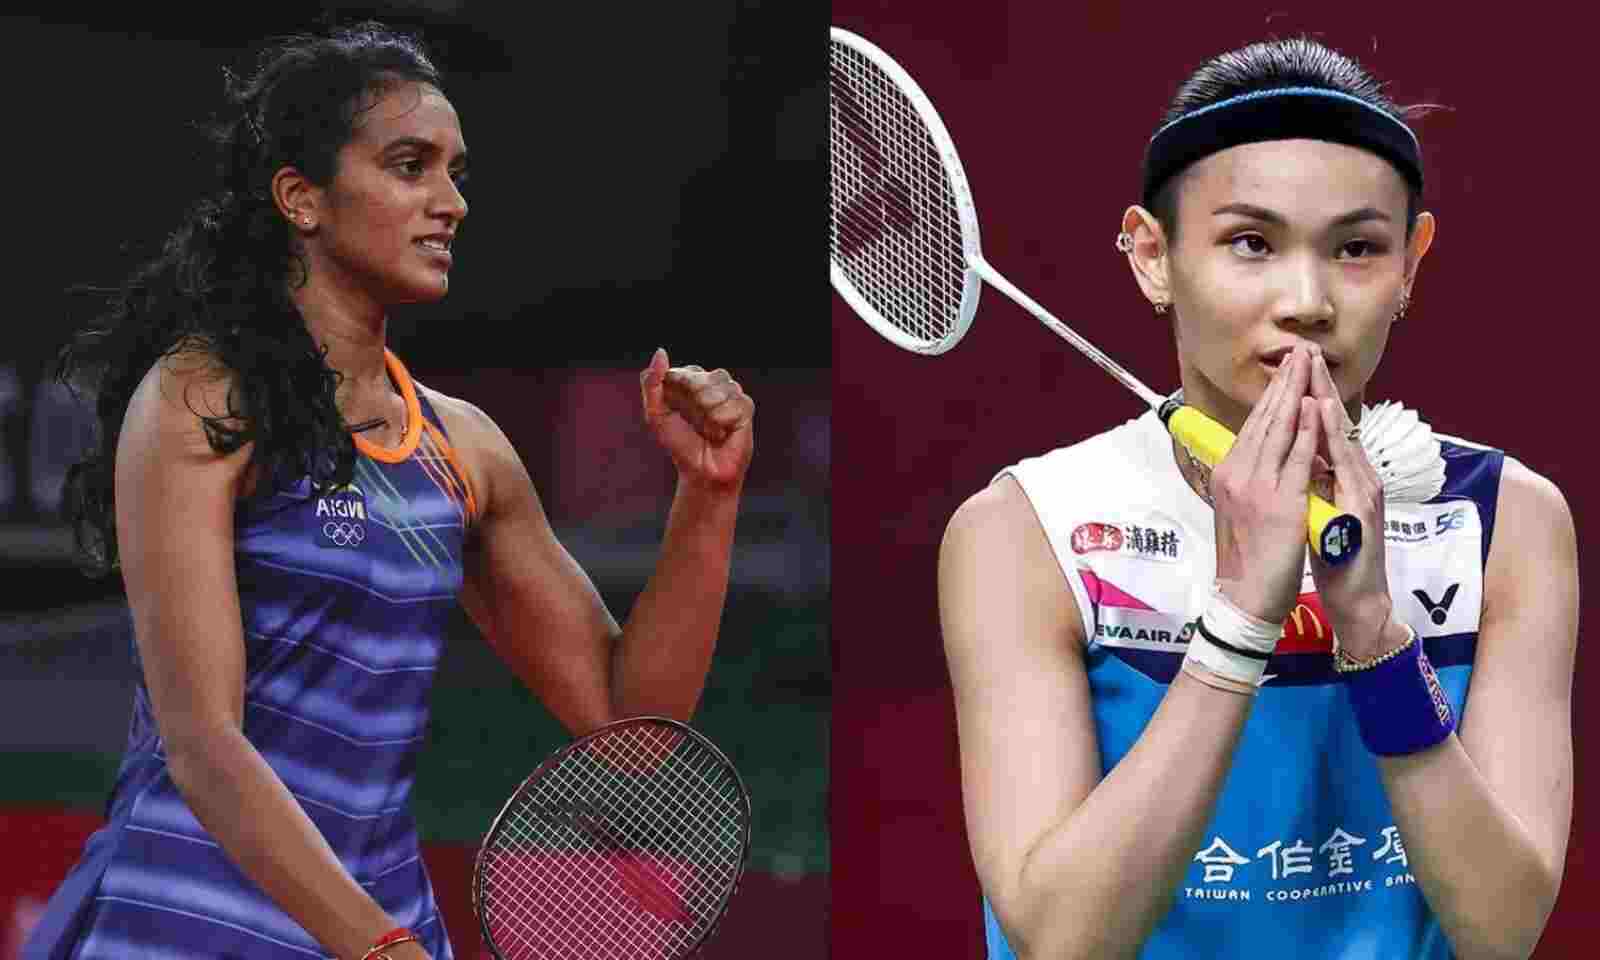 Tokyo Olympics Badminton Day 8, July 31 - PV Sindhu vs Tai Tzu-ying to battle it out in the semi finals